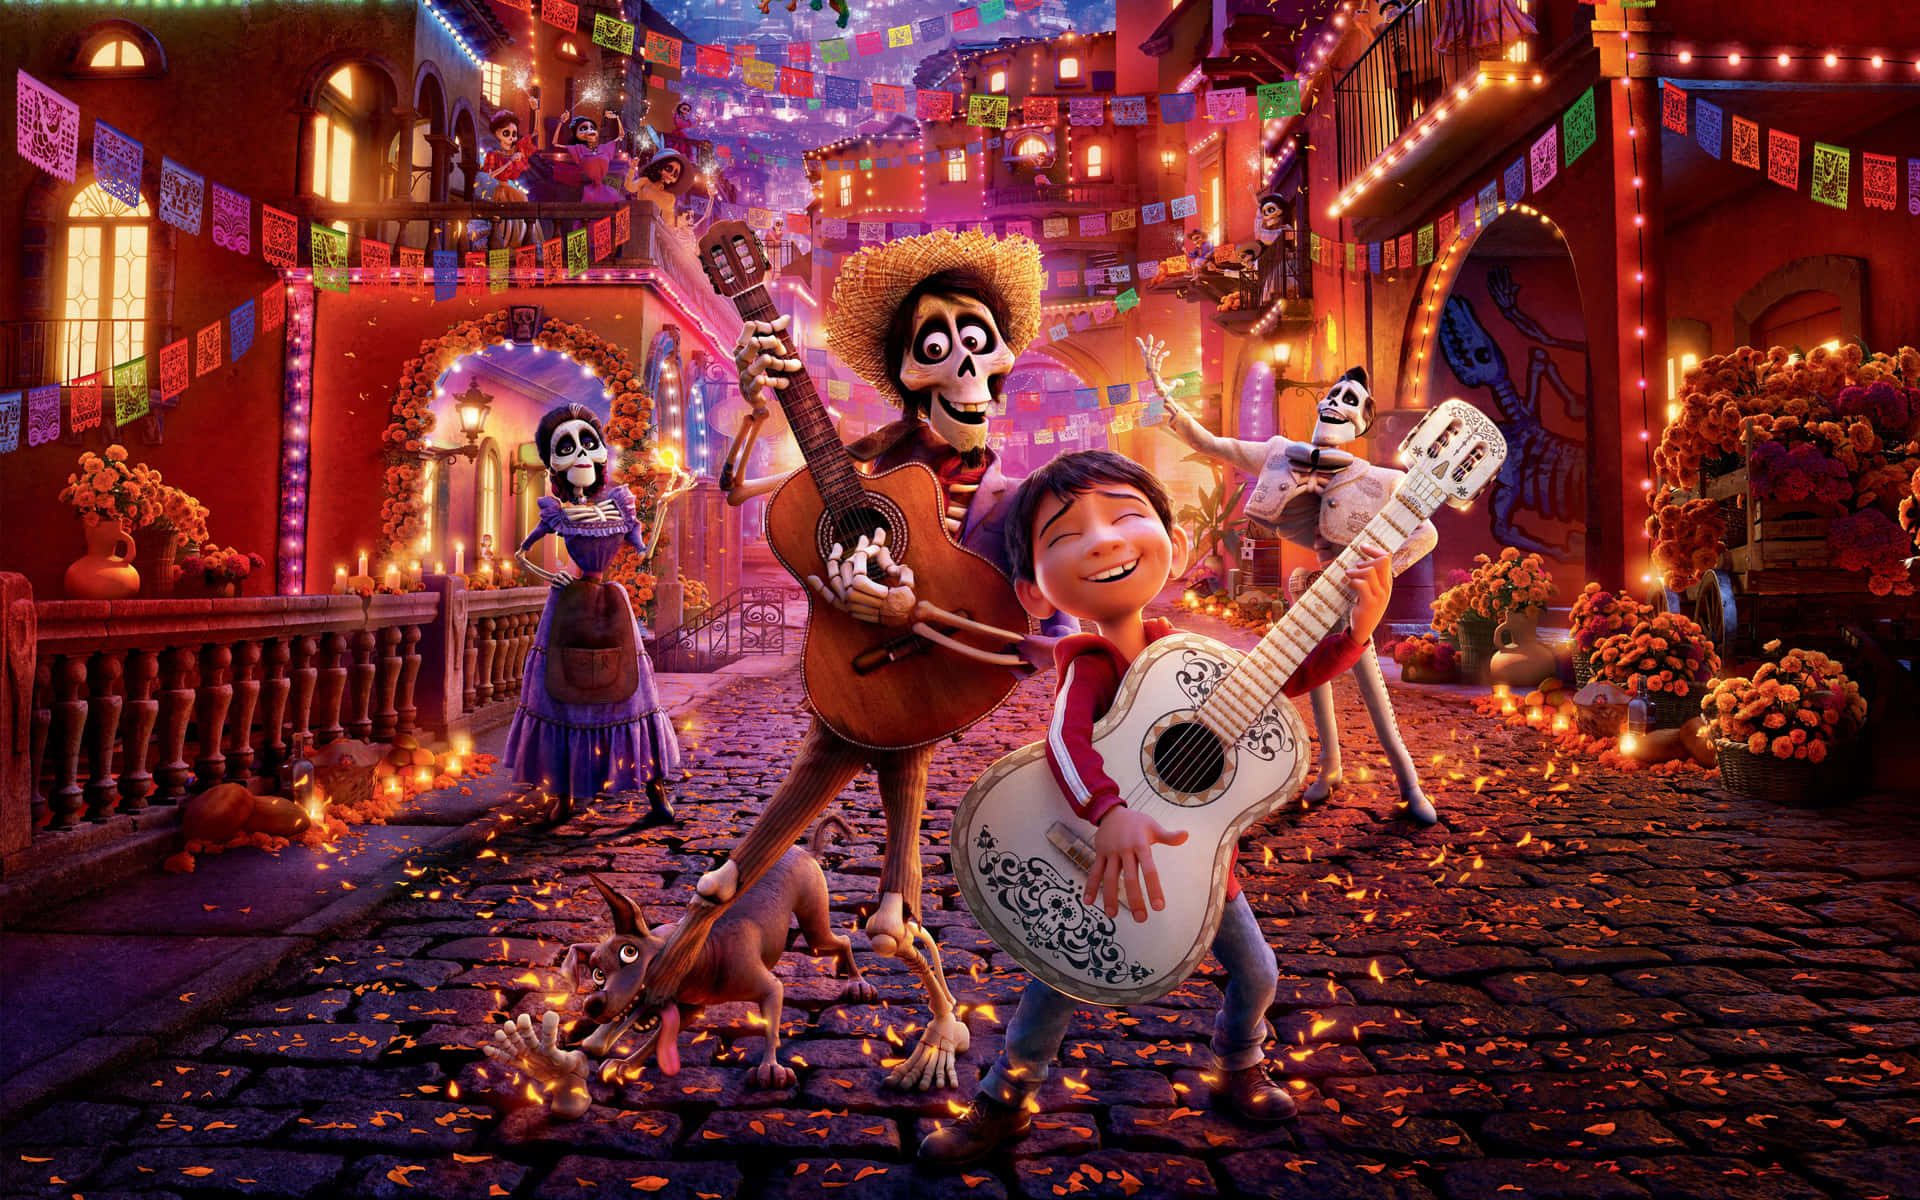 Experience the magic of Disney/Pixar's Coco and seek adventure in the Land of the Dead!